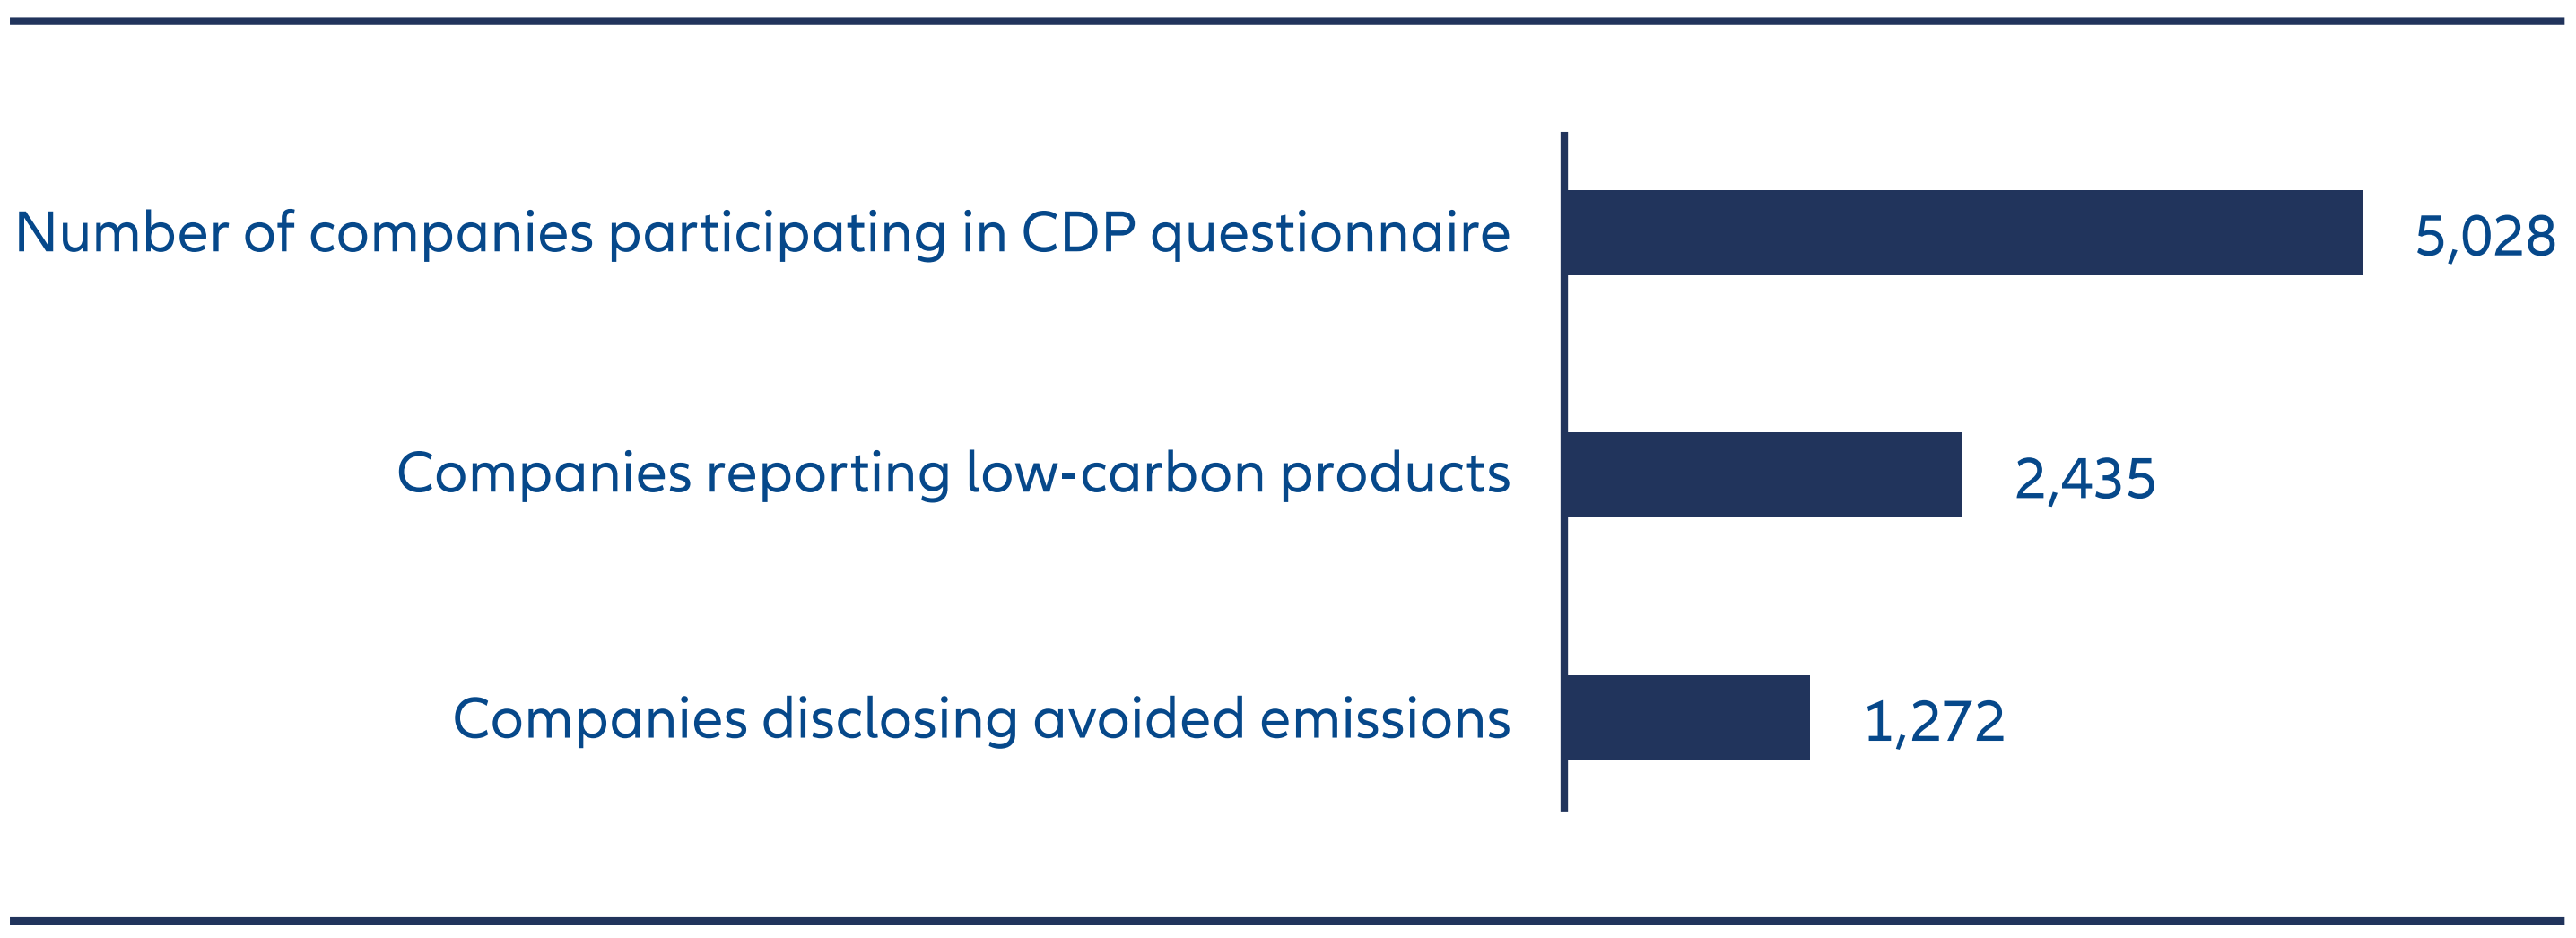 Exhibit 4: Number of companies participating in different CDP Climate disclosures